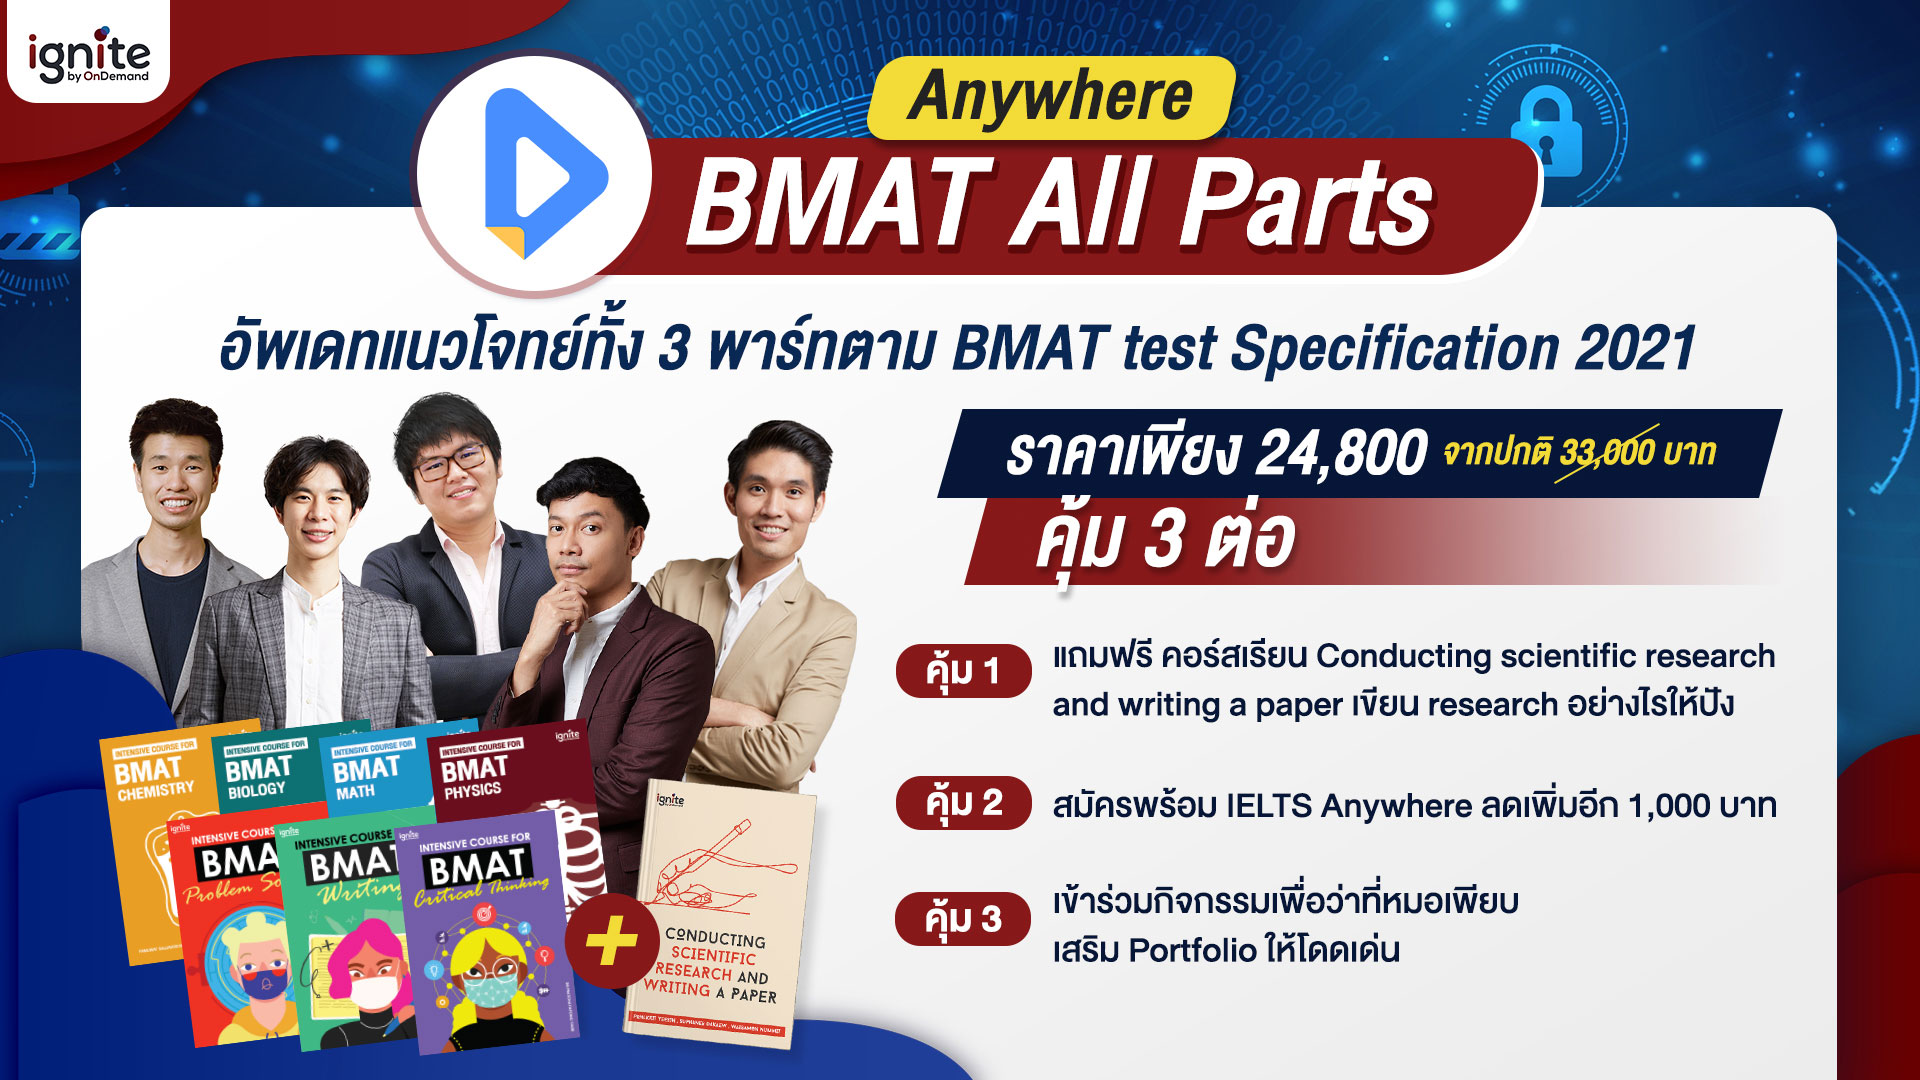 BMAT ALL Part Pack - ignite by OnDemand - Bigcover